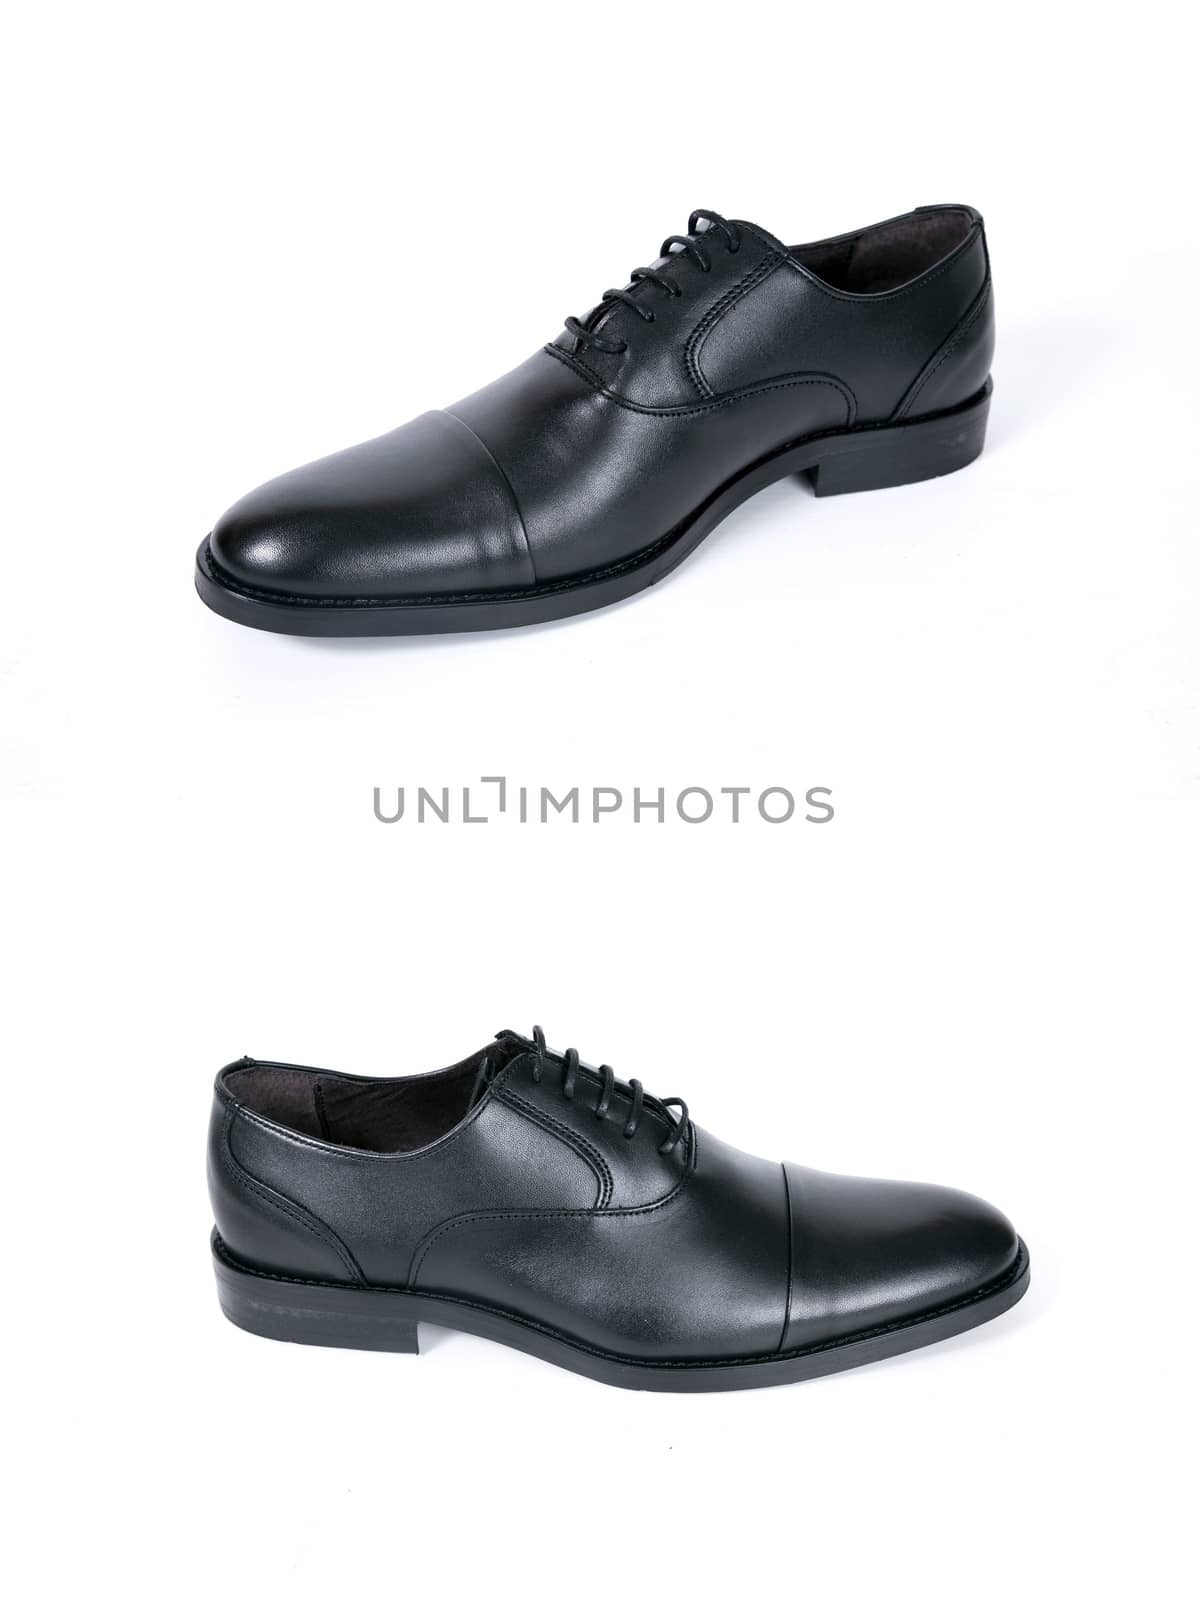 Group of black shoes on white background, isolated product.